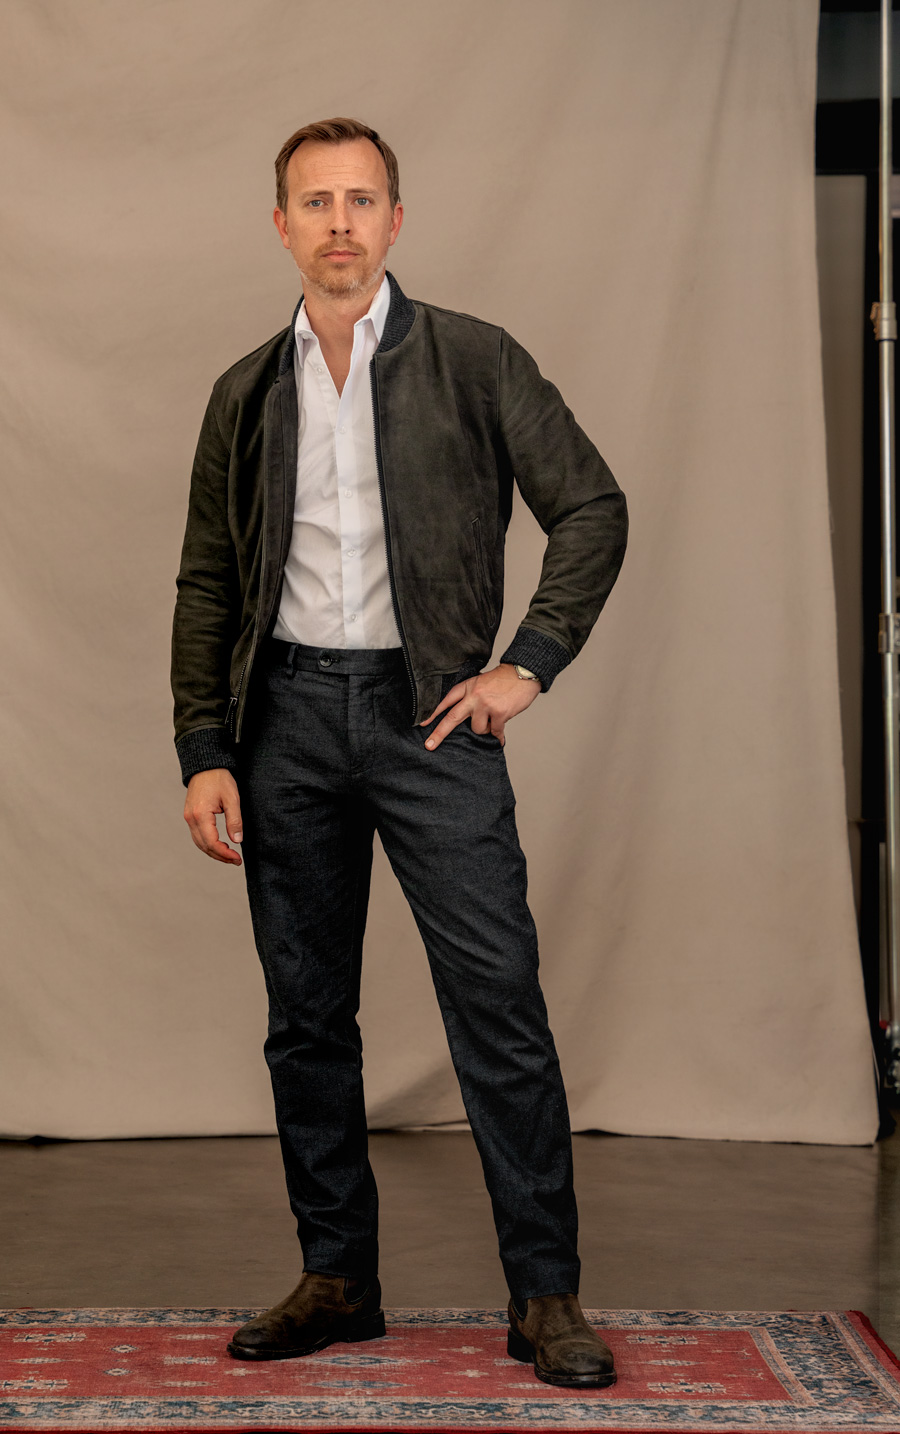 a man's outfit example using a suede bomber jacket as an alternative to a blazer. the outfit includes a white dress shirt, gray pants, and brown chelsea boots